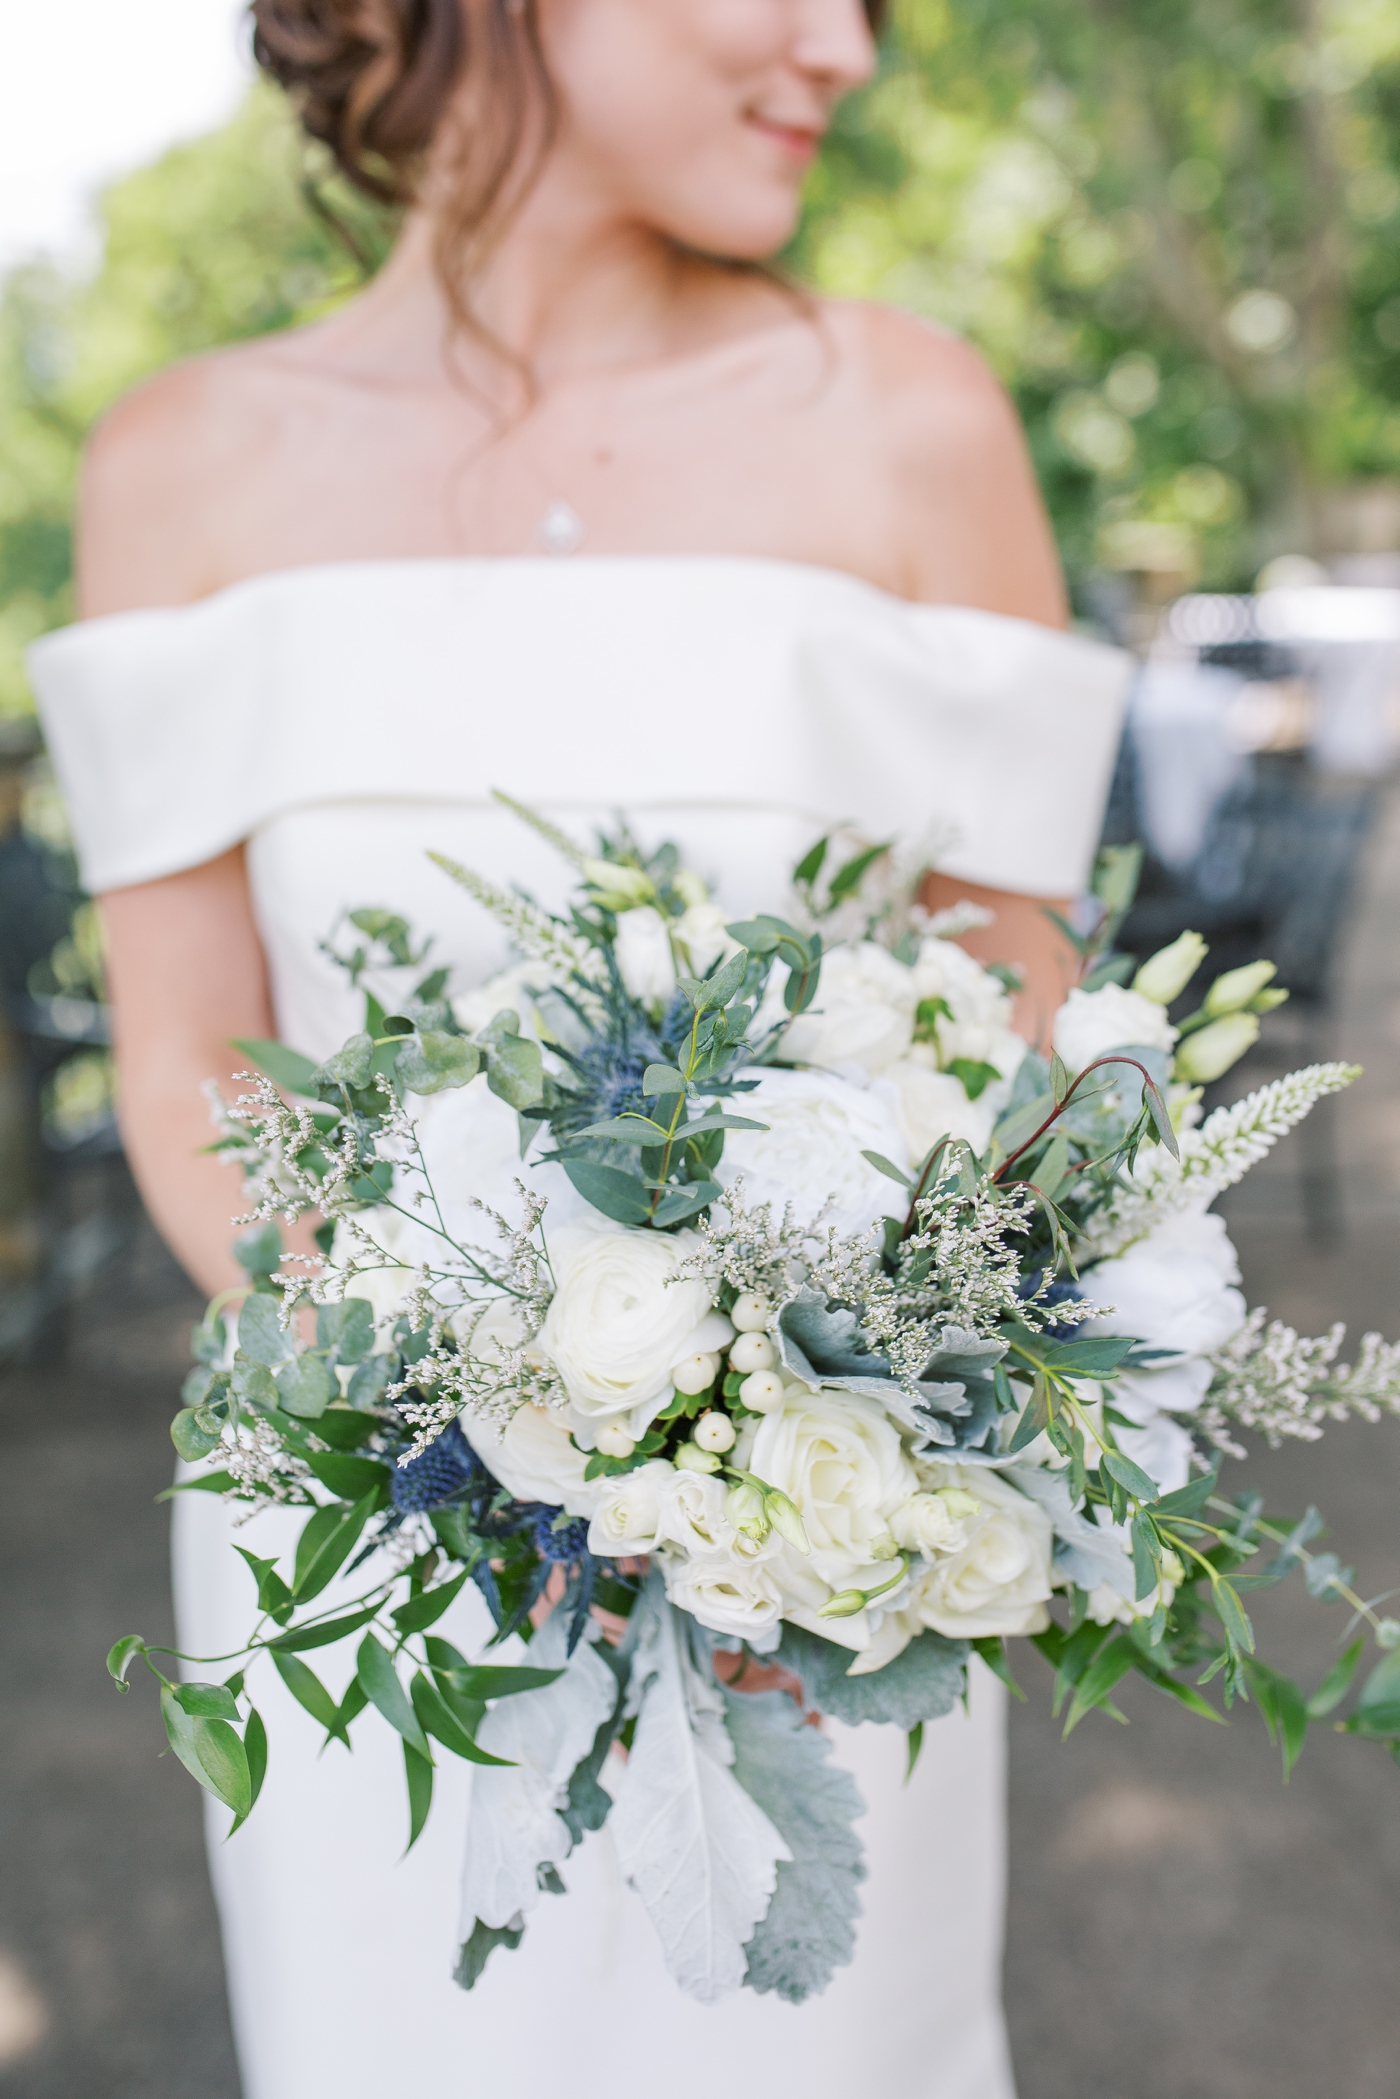 Bridal bouquet with white roses, dusty miller and sea holly